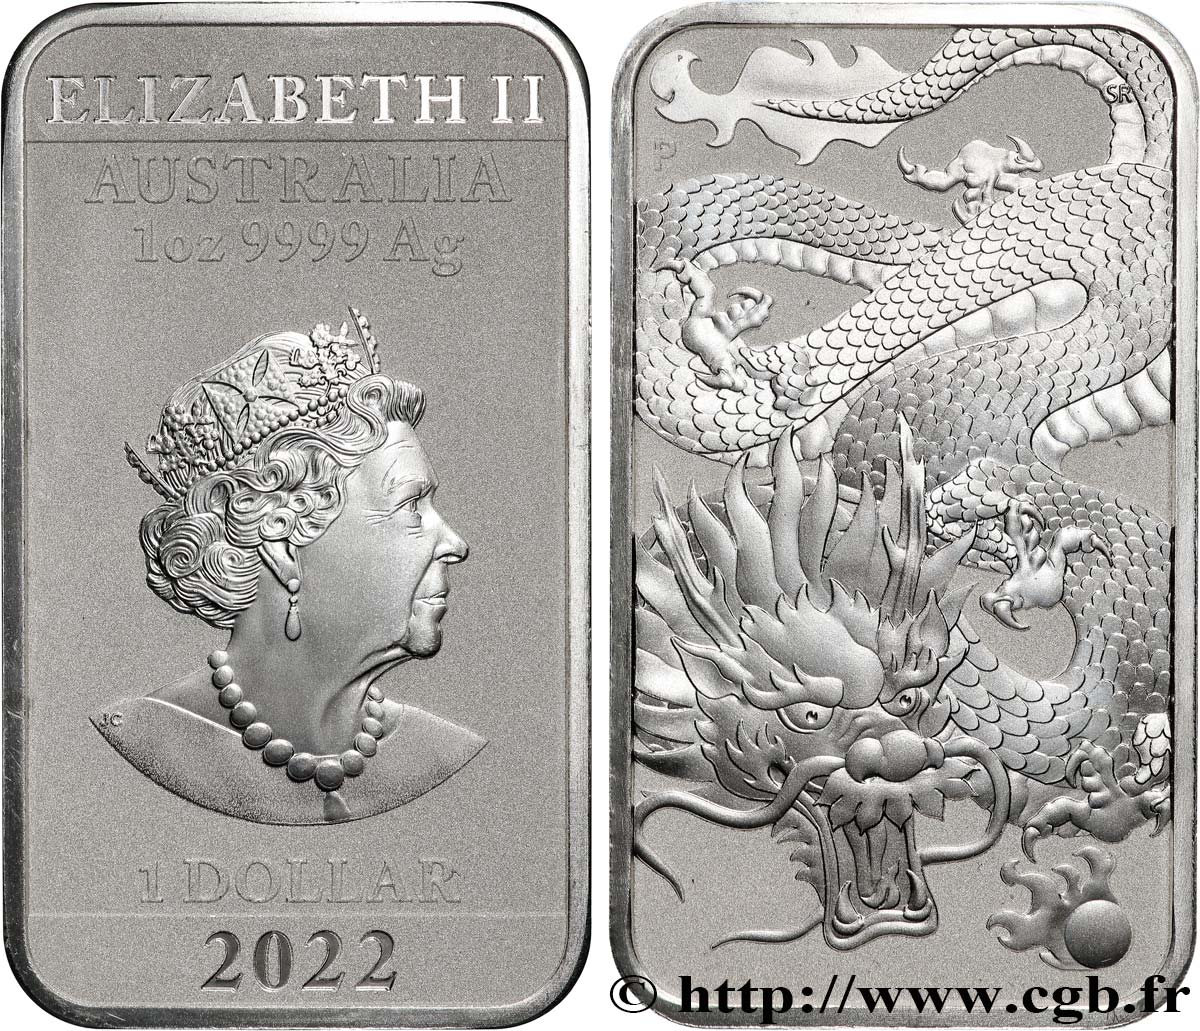 SILVER INVESTMENT 1 Oz - 1 Dollar Proof Dragon chinois 2023 Perth ST 